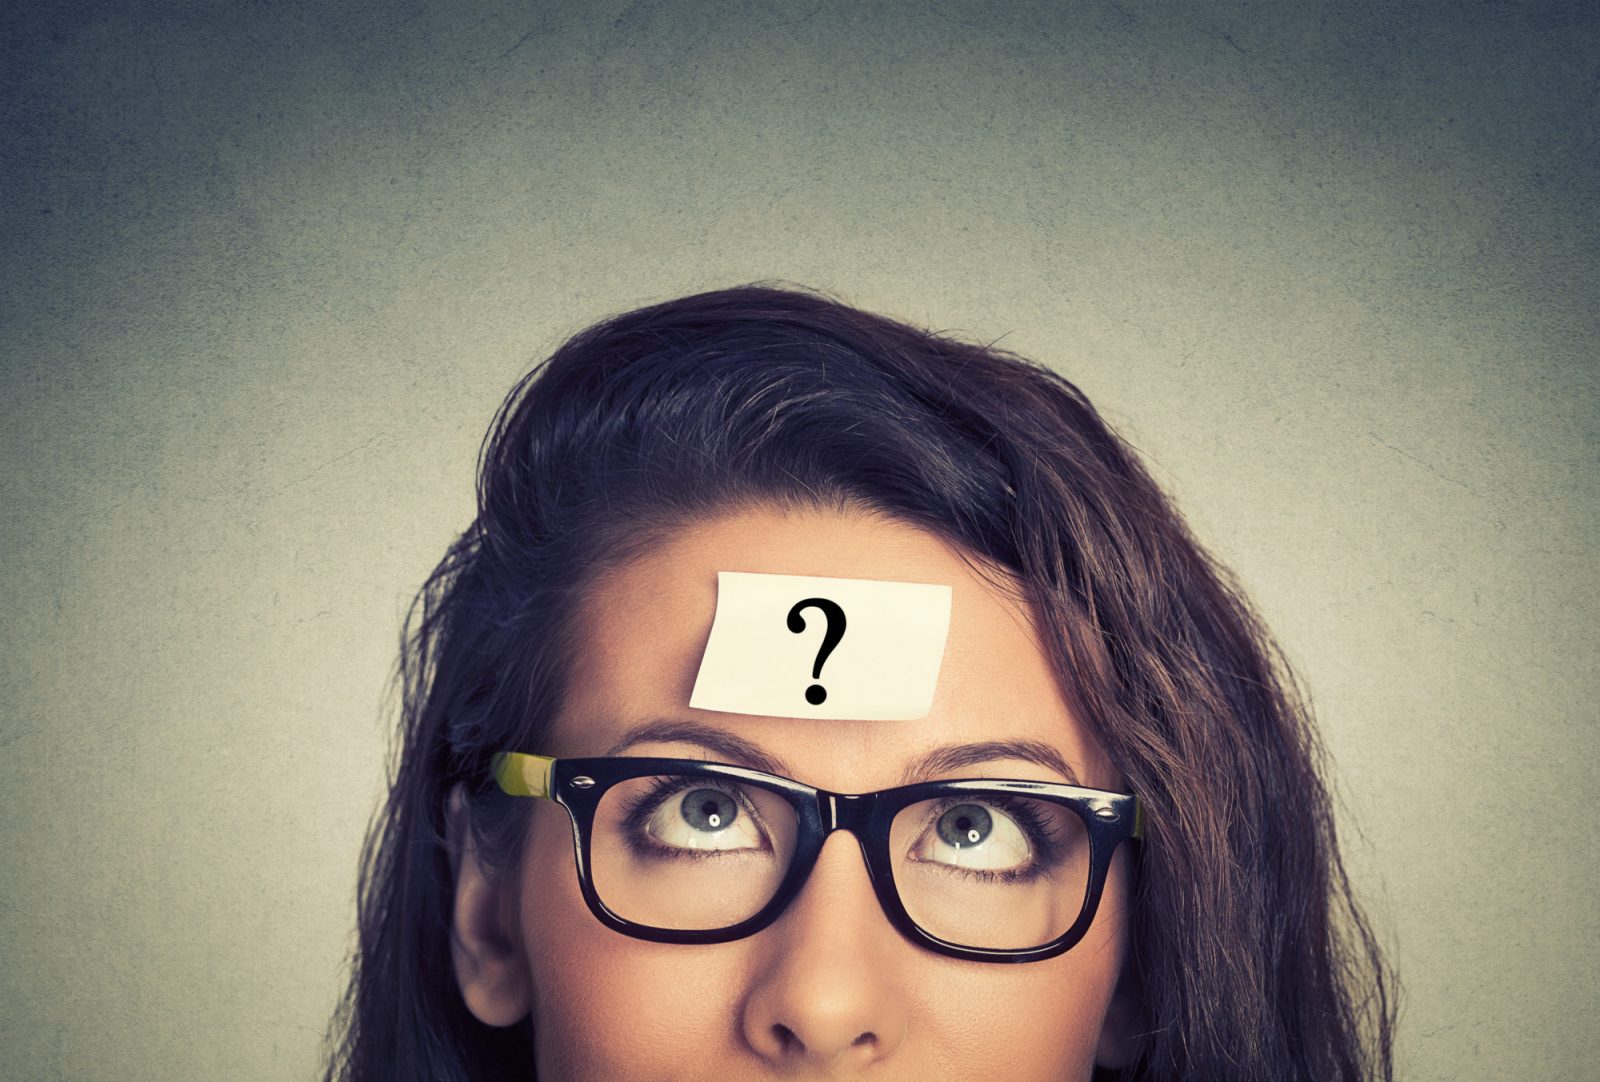 How Well-Rounded Is Your Knowledge? Take This General Knowledge Quiz to Find Out! Thinking Woman